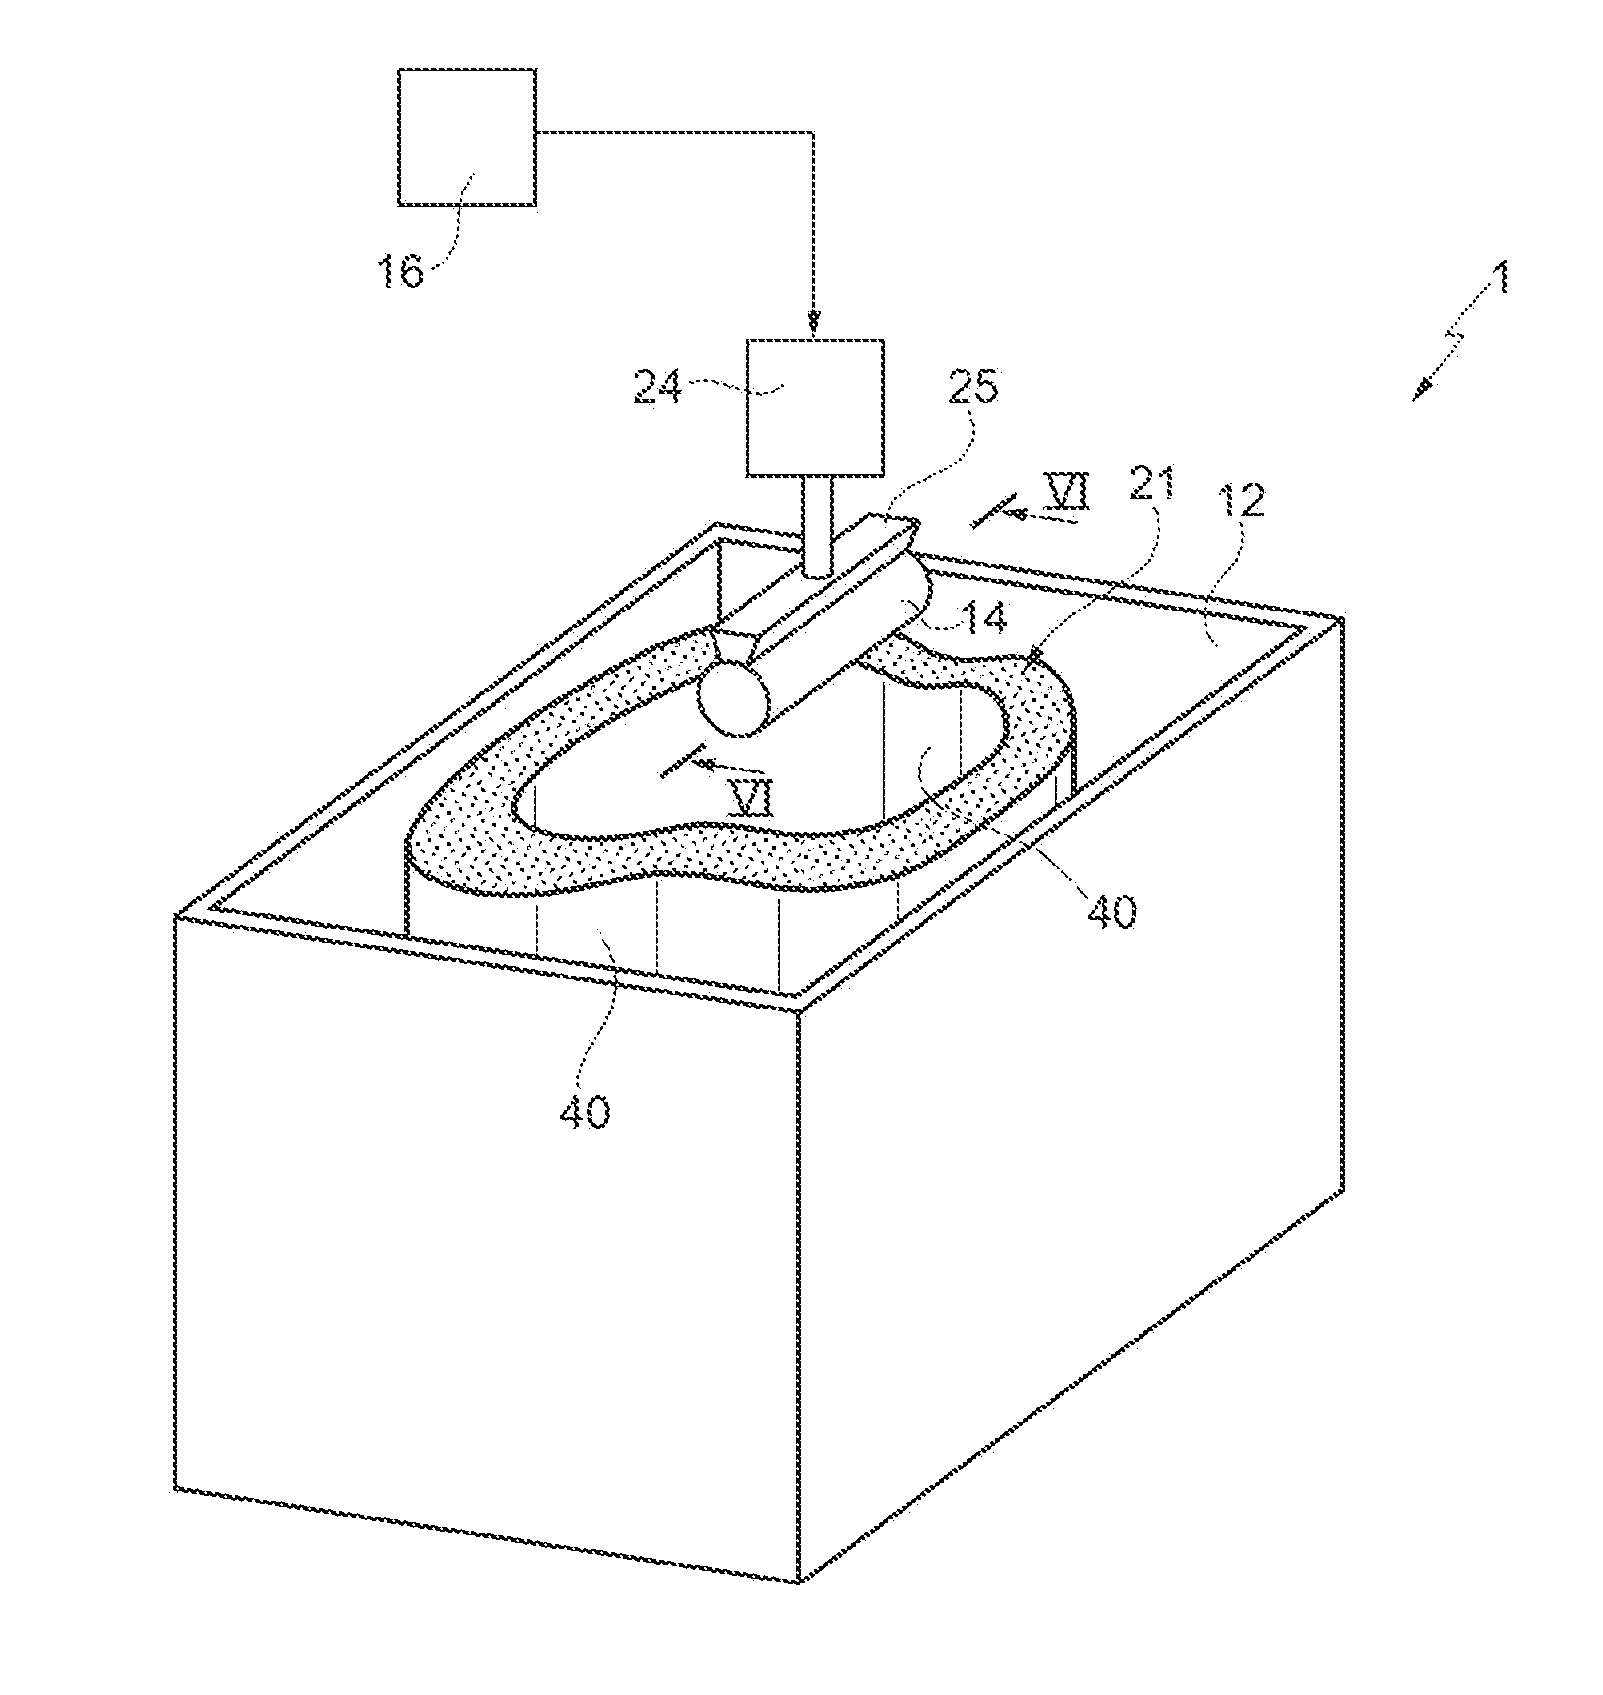 Powder dispenser for making a component by additive manufacturing